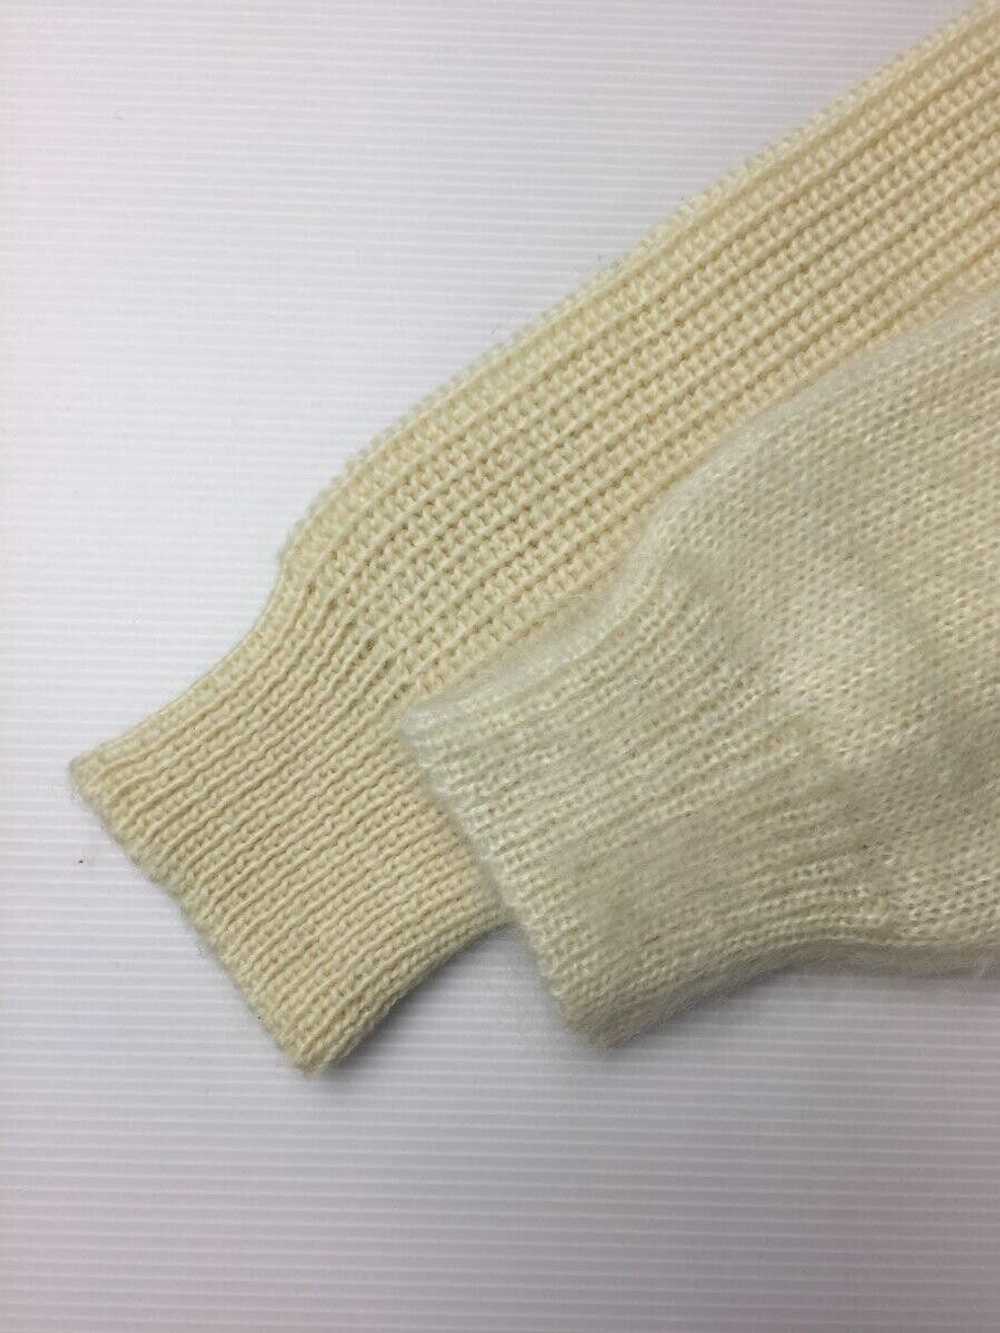 Undercover Hybrid Mohair Patchwork Knit Sweater - image 3